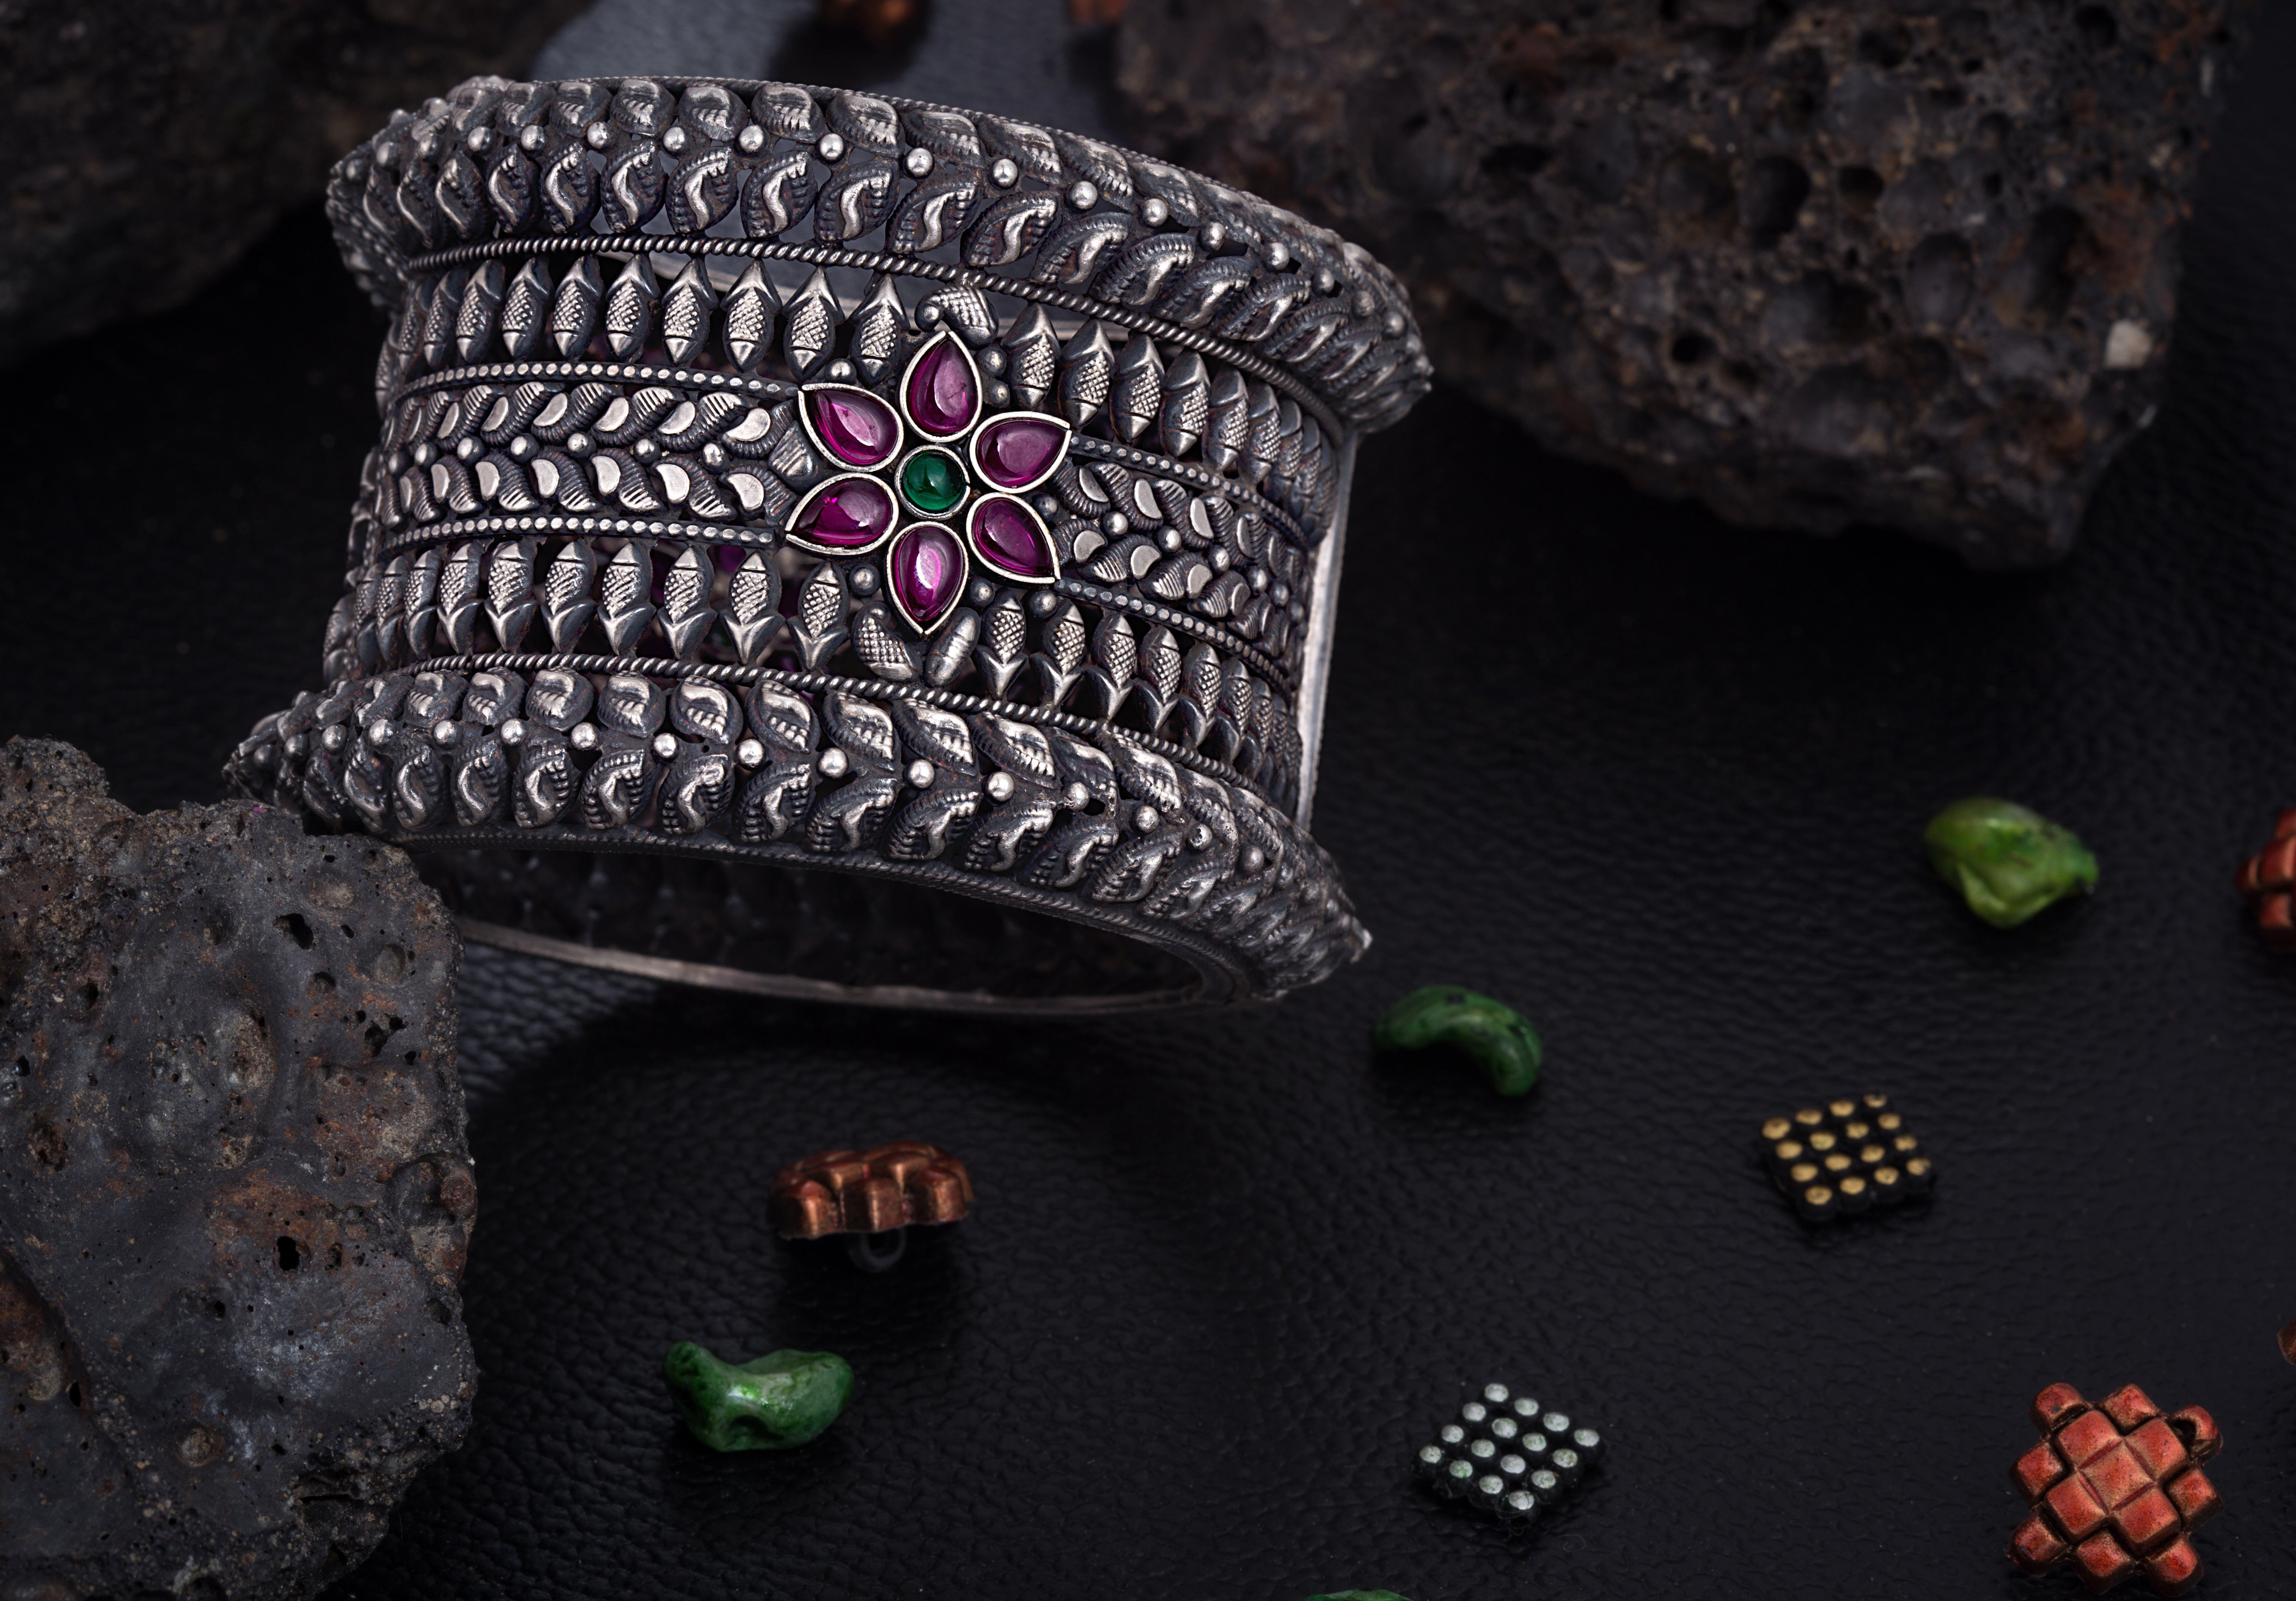 92.5 Sterling Silver Kada with floral patterns in antique finish studded with ruby and emerald